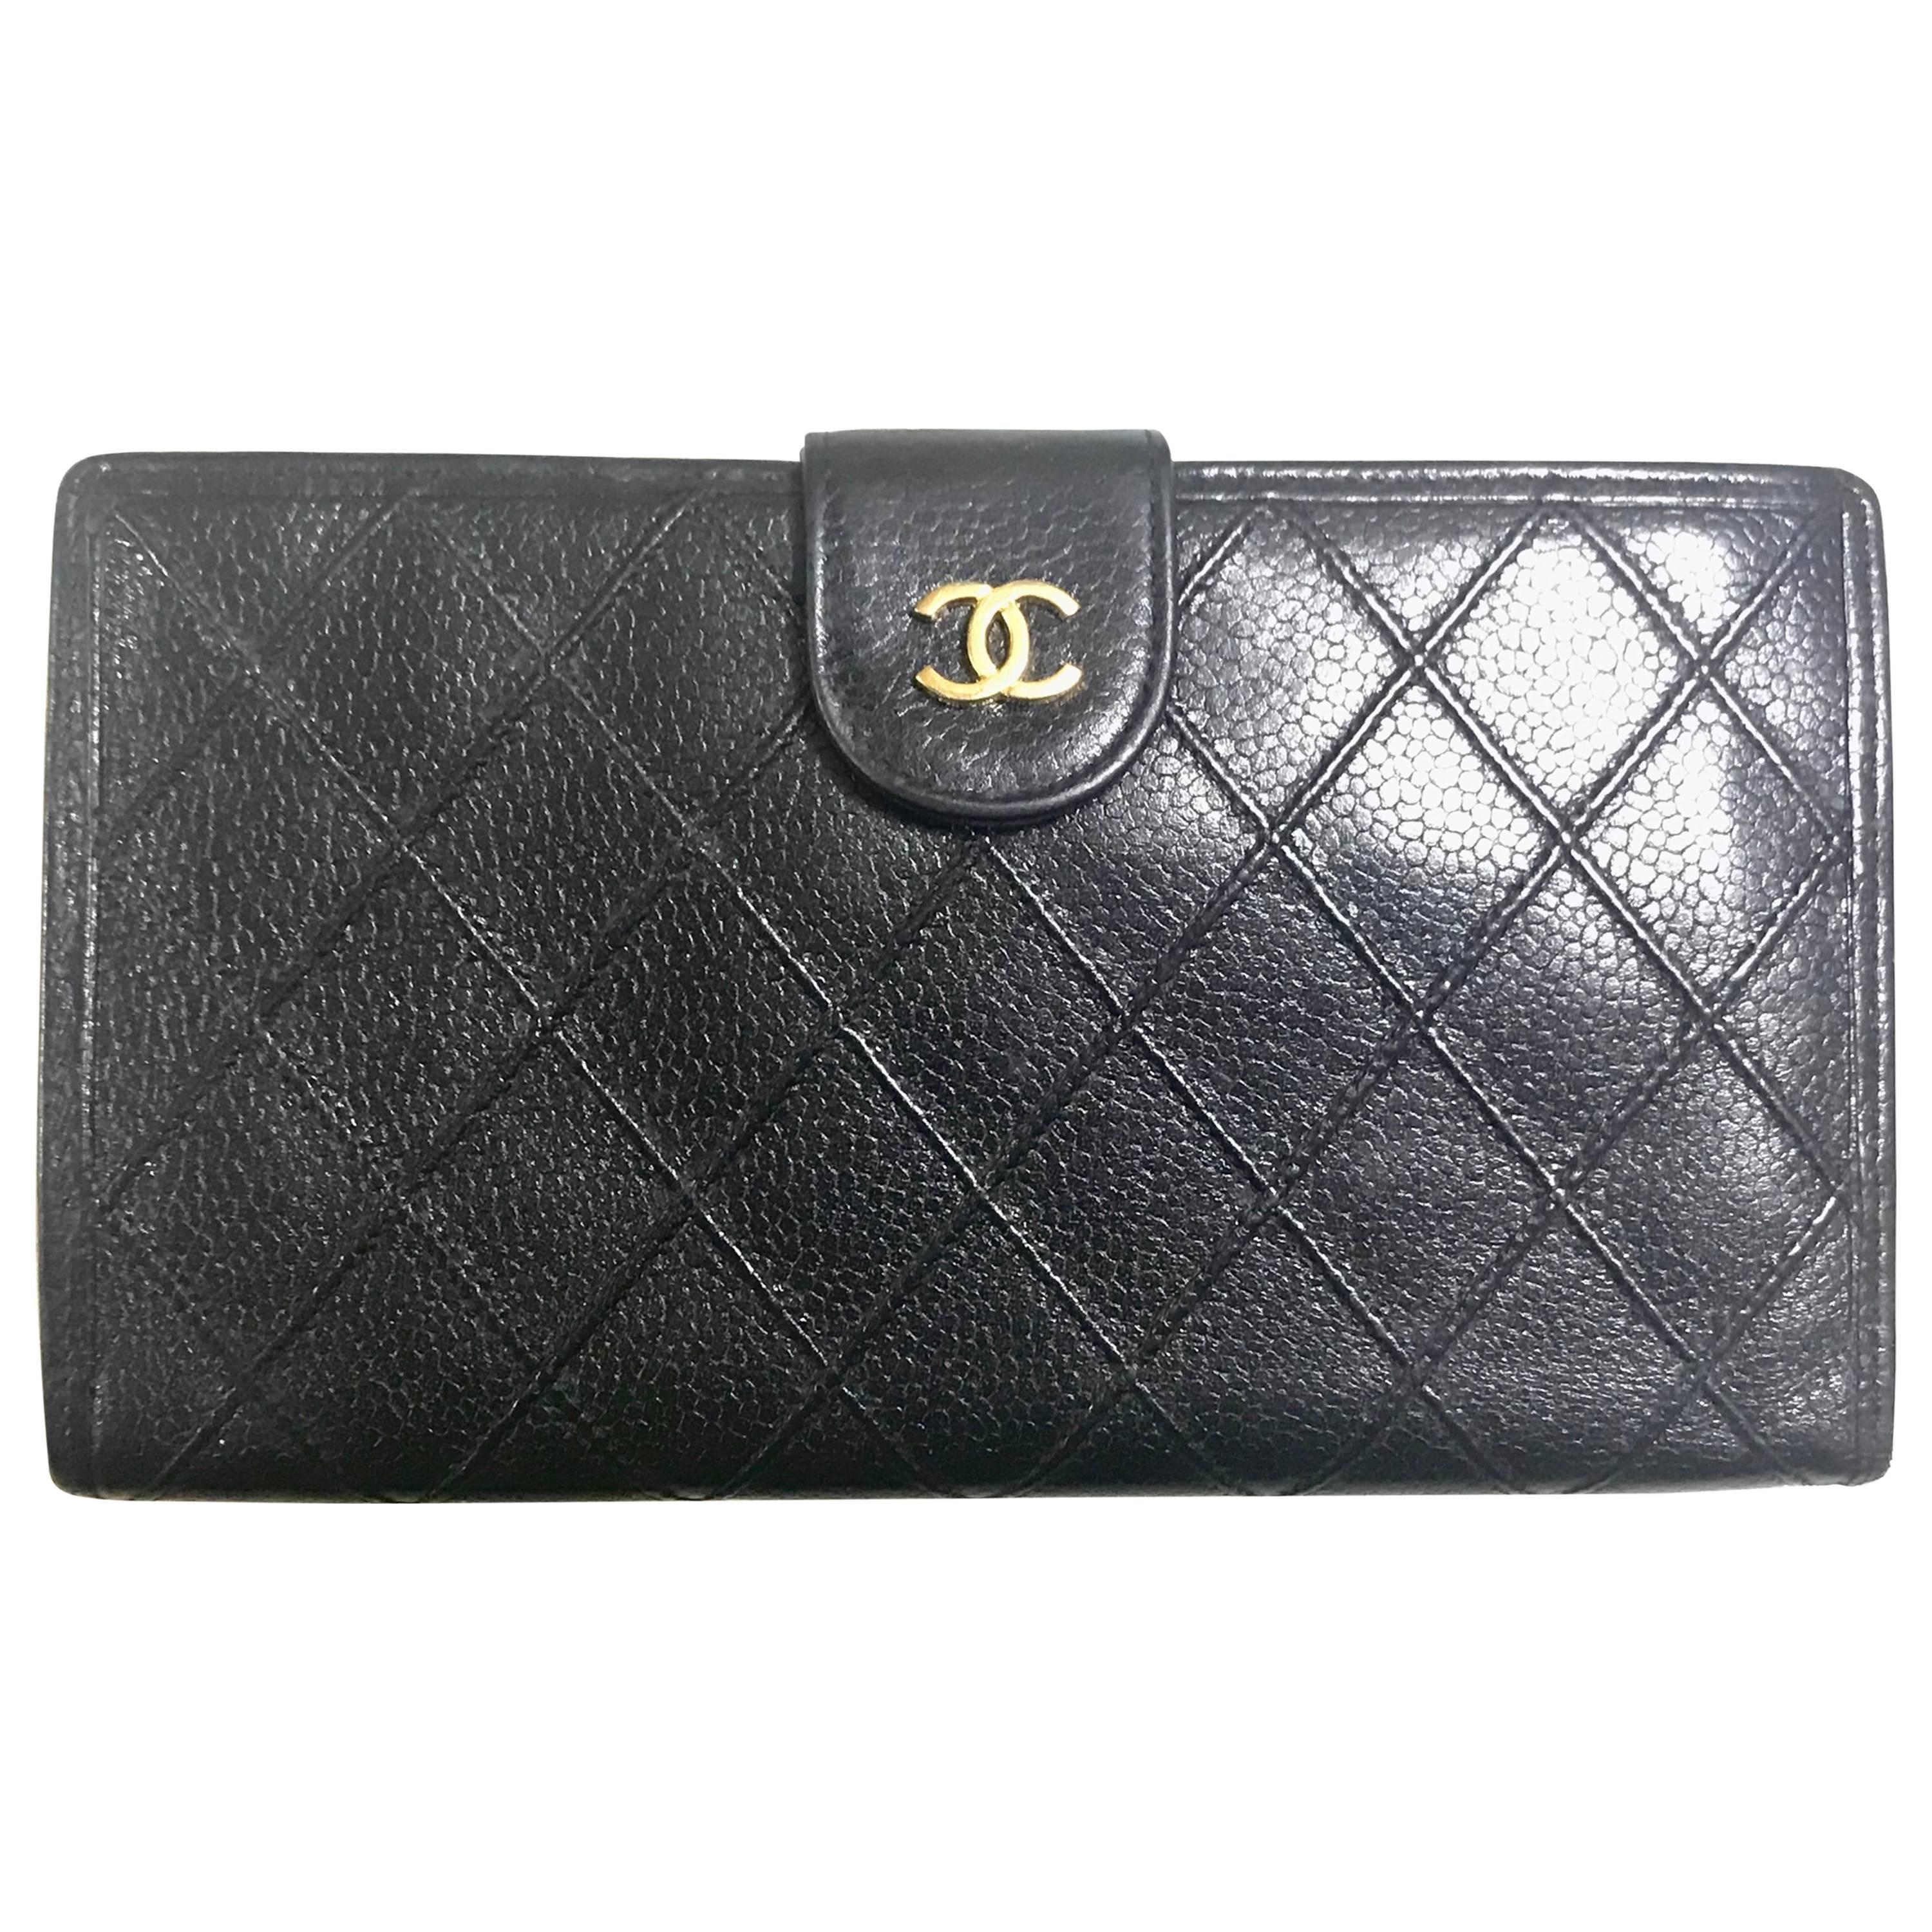 Vintage CHANEL black caviar leather wallet with stitches and gold tone CC motif. For Sale